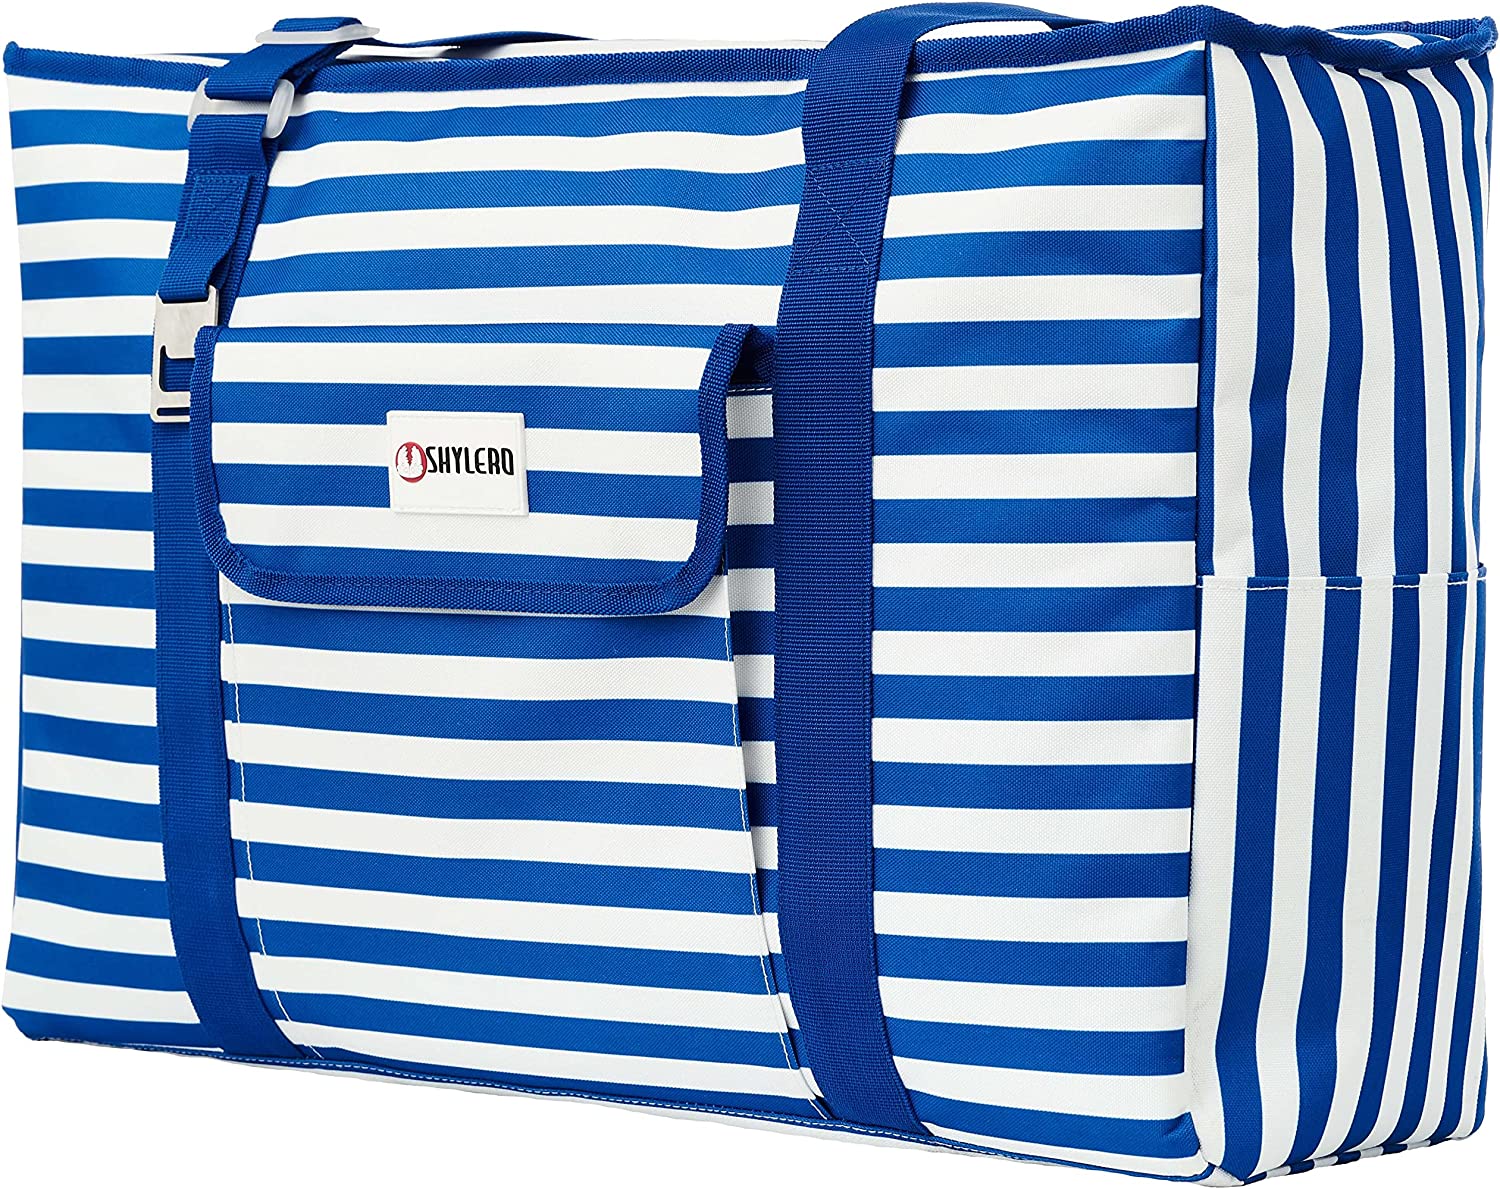 Insulated Cooler Bag XL - 100% Waterproof & Leakproof - Zippered Thermo Beach Bag, Picnic, Lunch, Shopping Tote - Has Four Outside Pockets, Bottle Opener, Key Holder